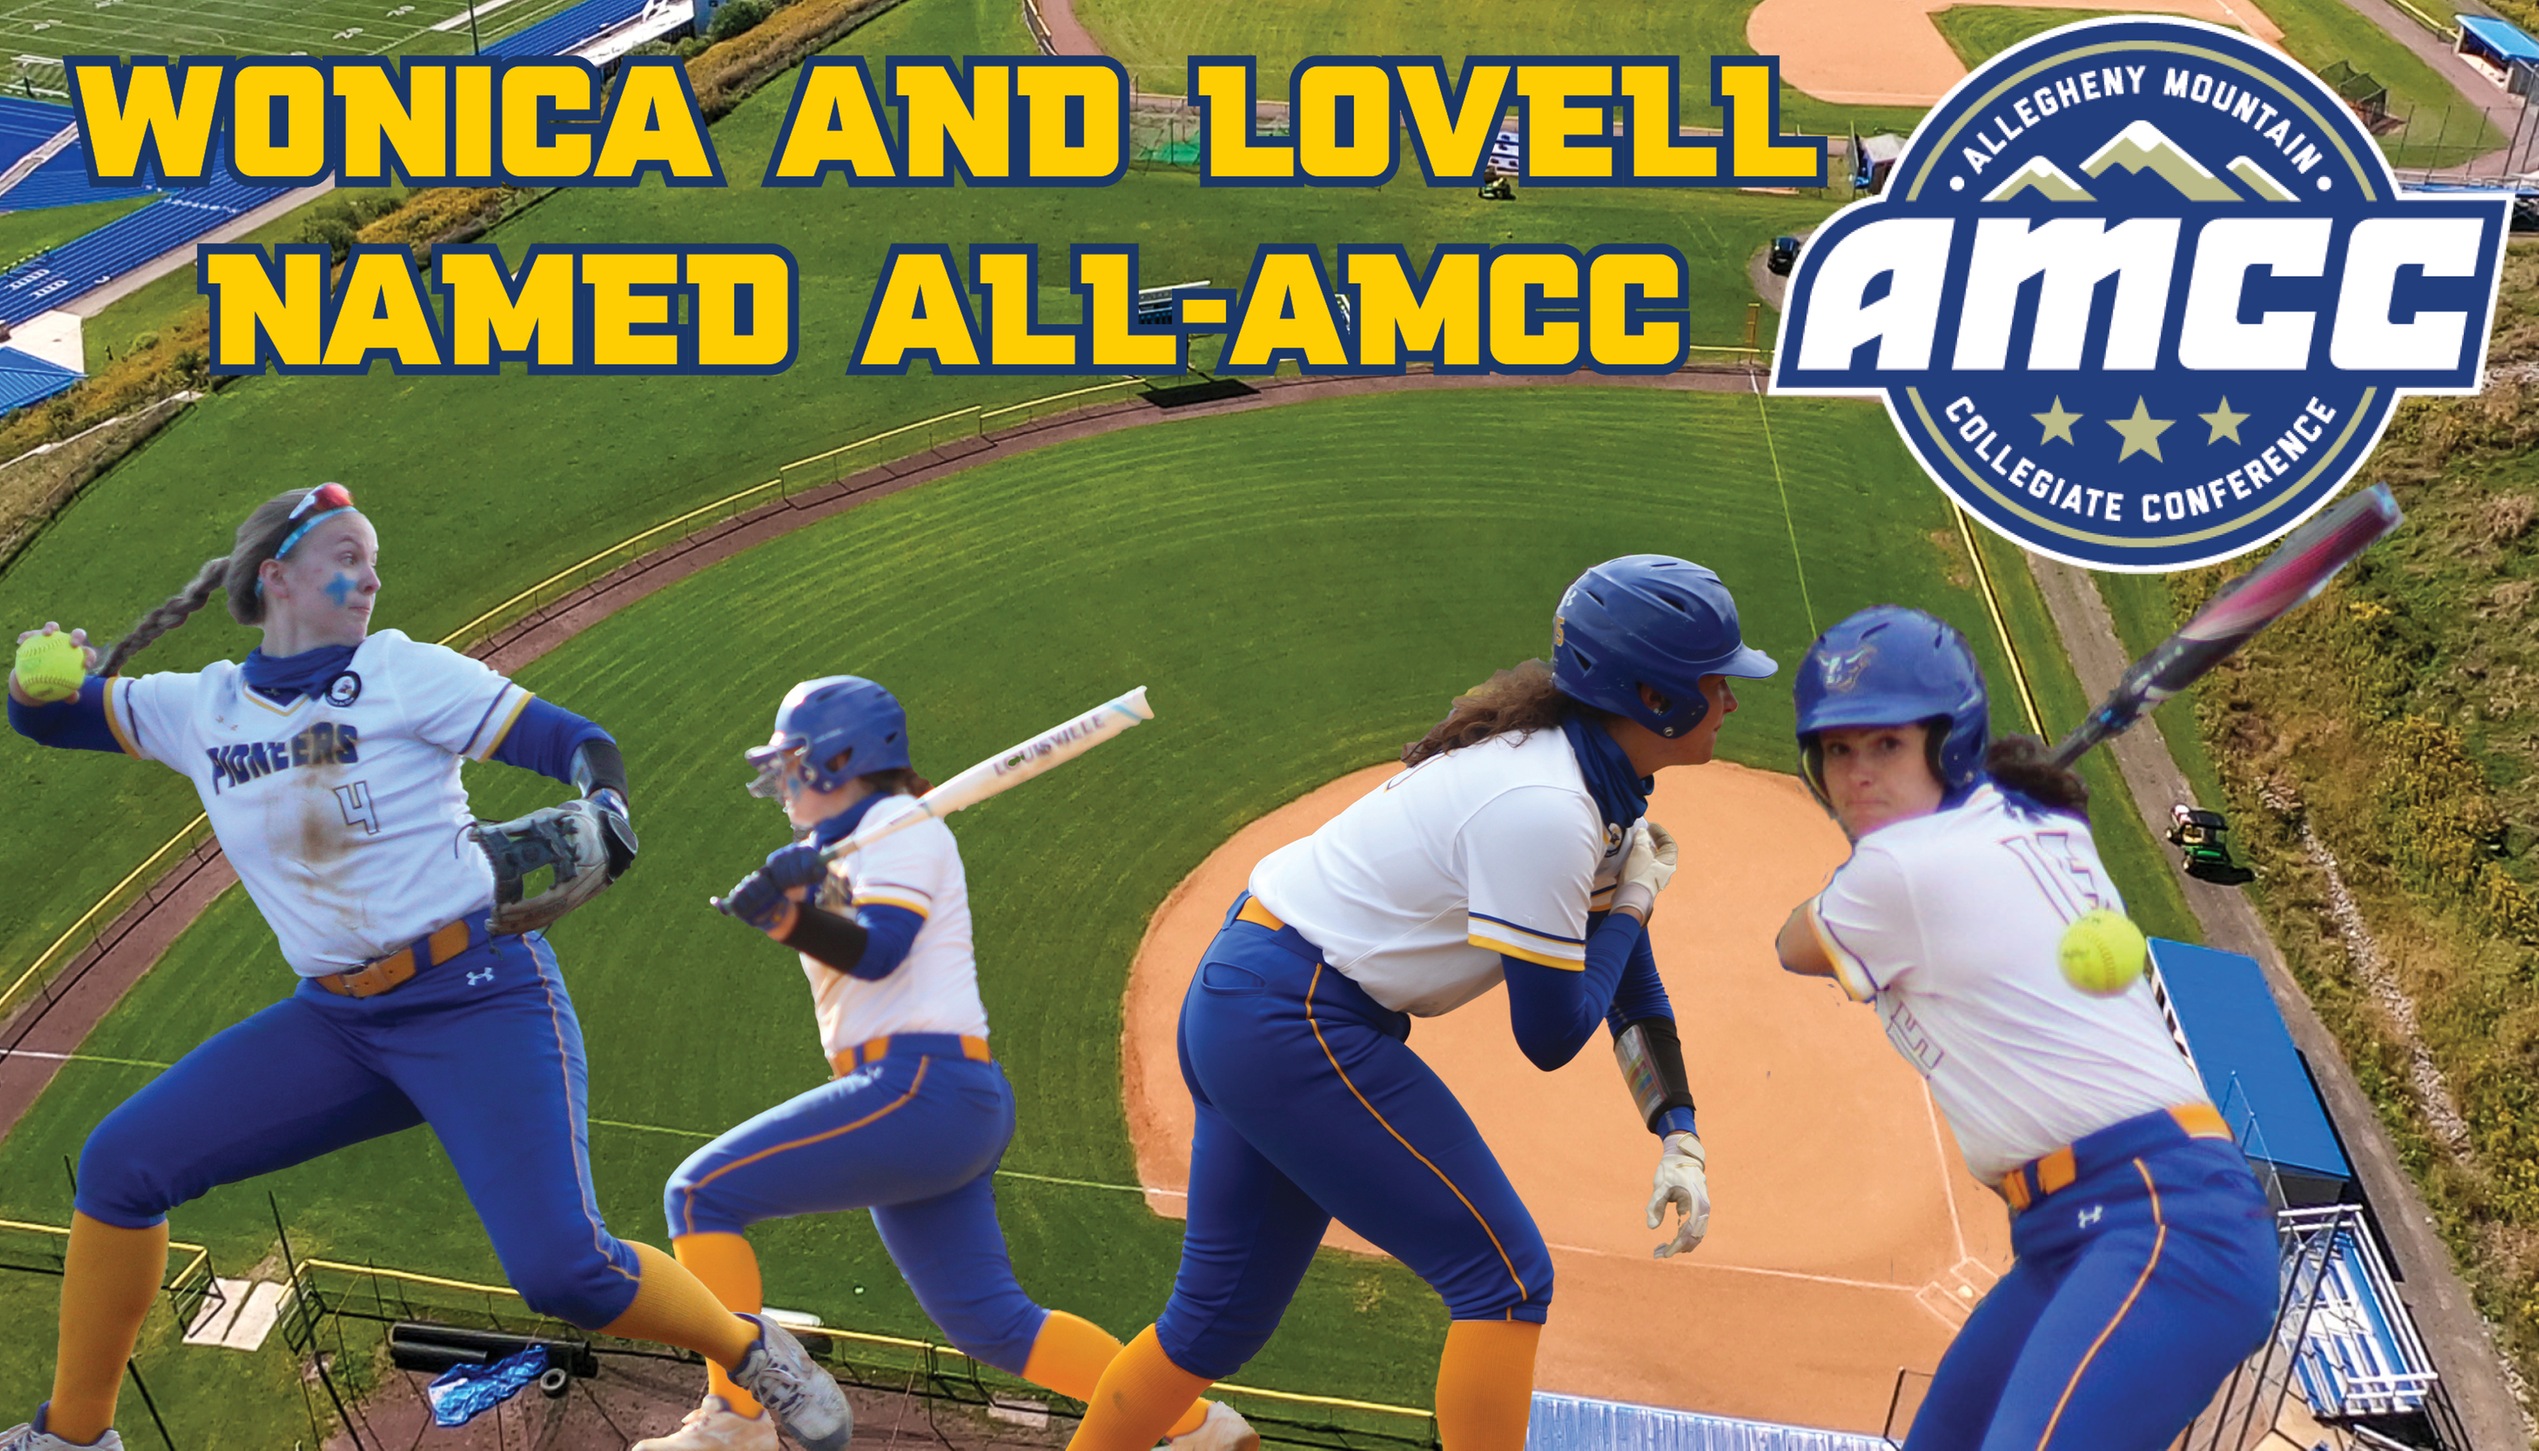 Kailey Wonica and Krista Lovell have been named All-AMCC - pictures are Wonica and Lovell in action.